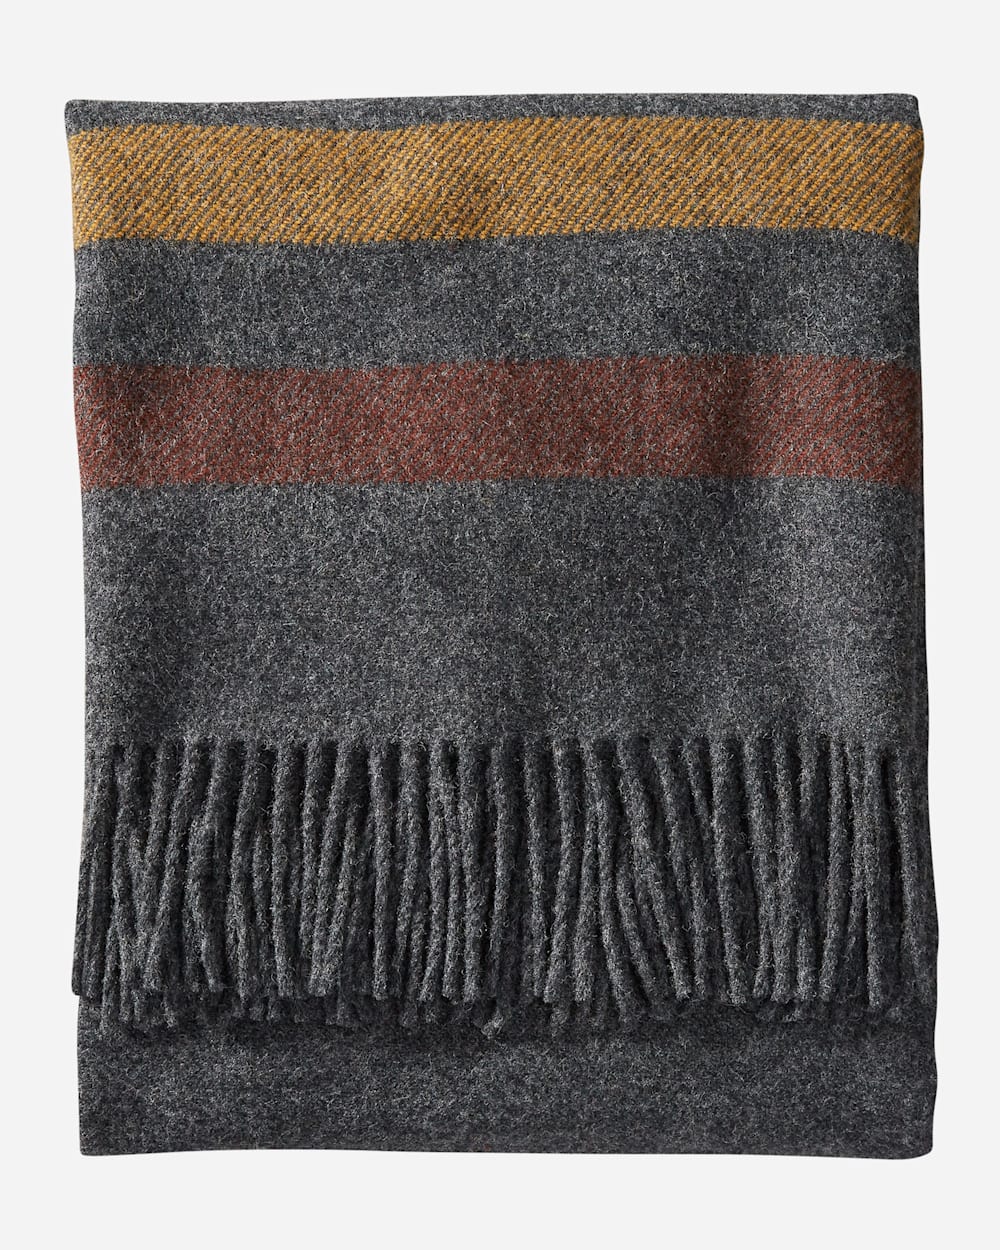 ALTERNATE VIEW OF ECO-WISE WOOL FRINGED THROW IN OXFORD STRIPE image number 2